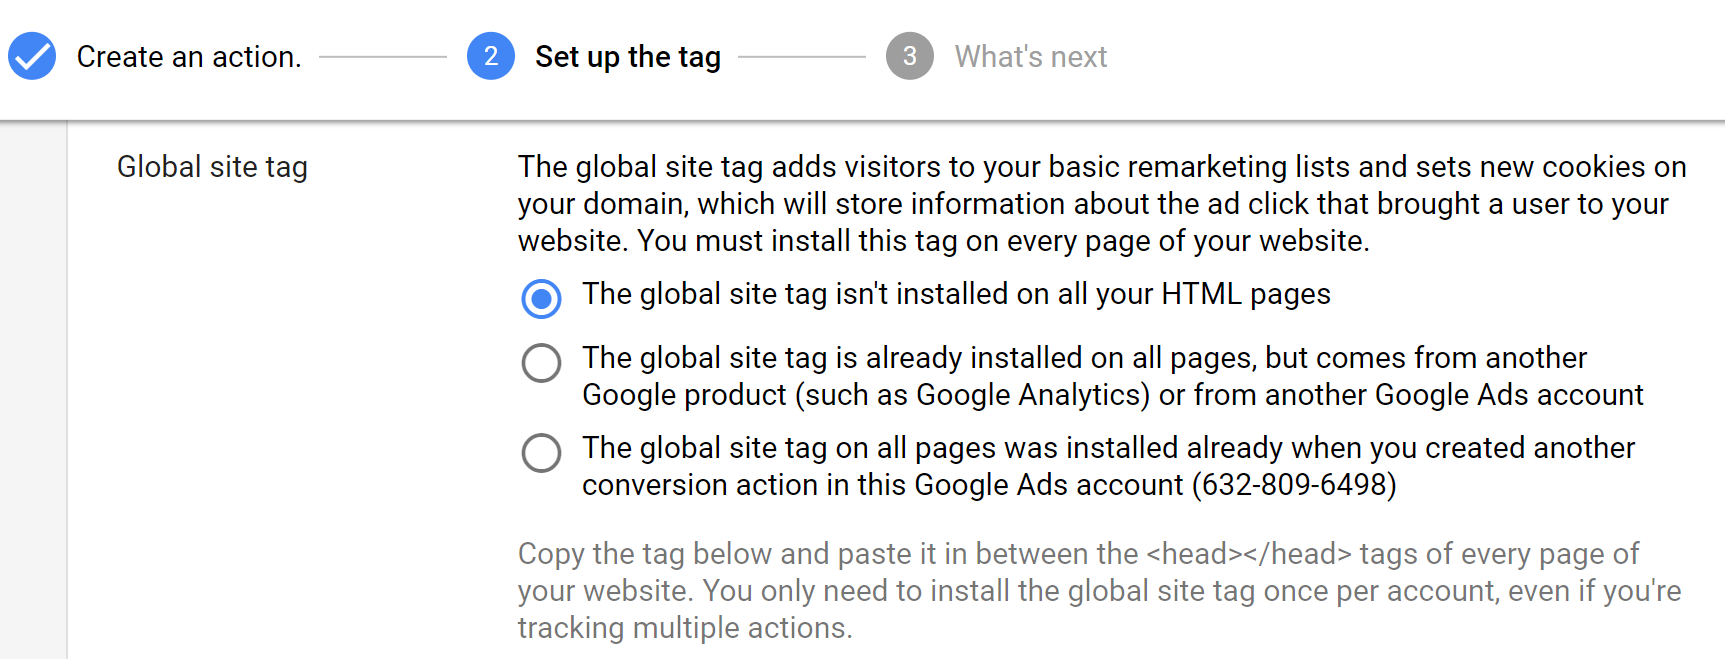 Choose the global site tag option.